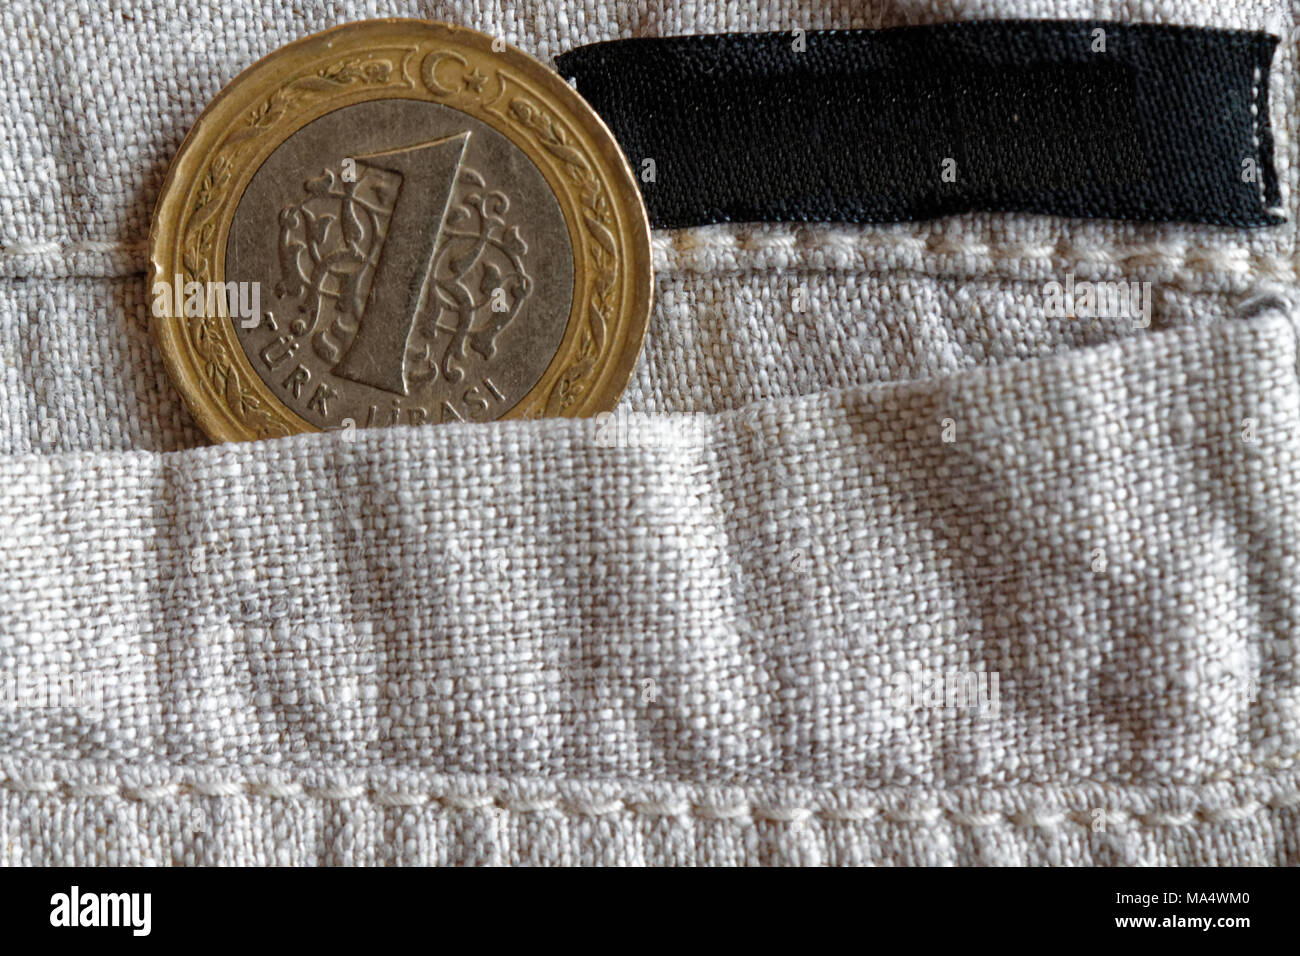 Turkish coin with a denomination of one lira in the pocket of old linen pants empty black stripe for label Stock Photo